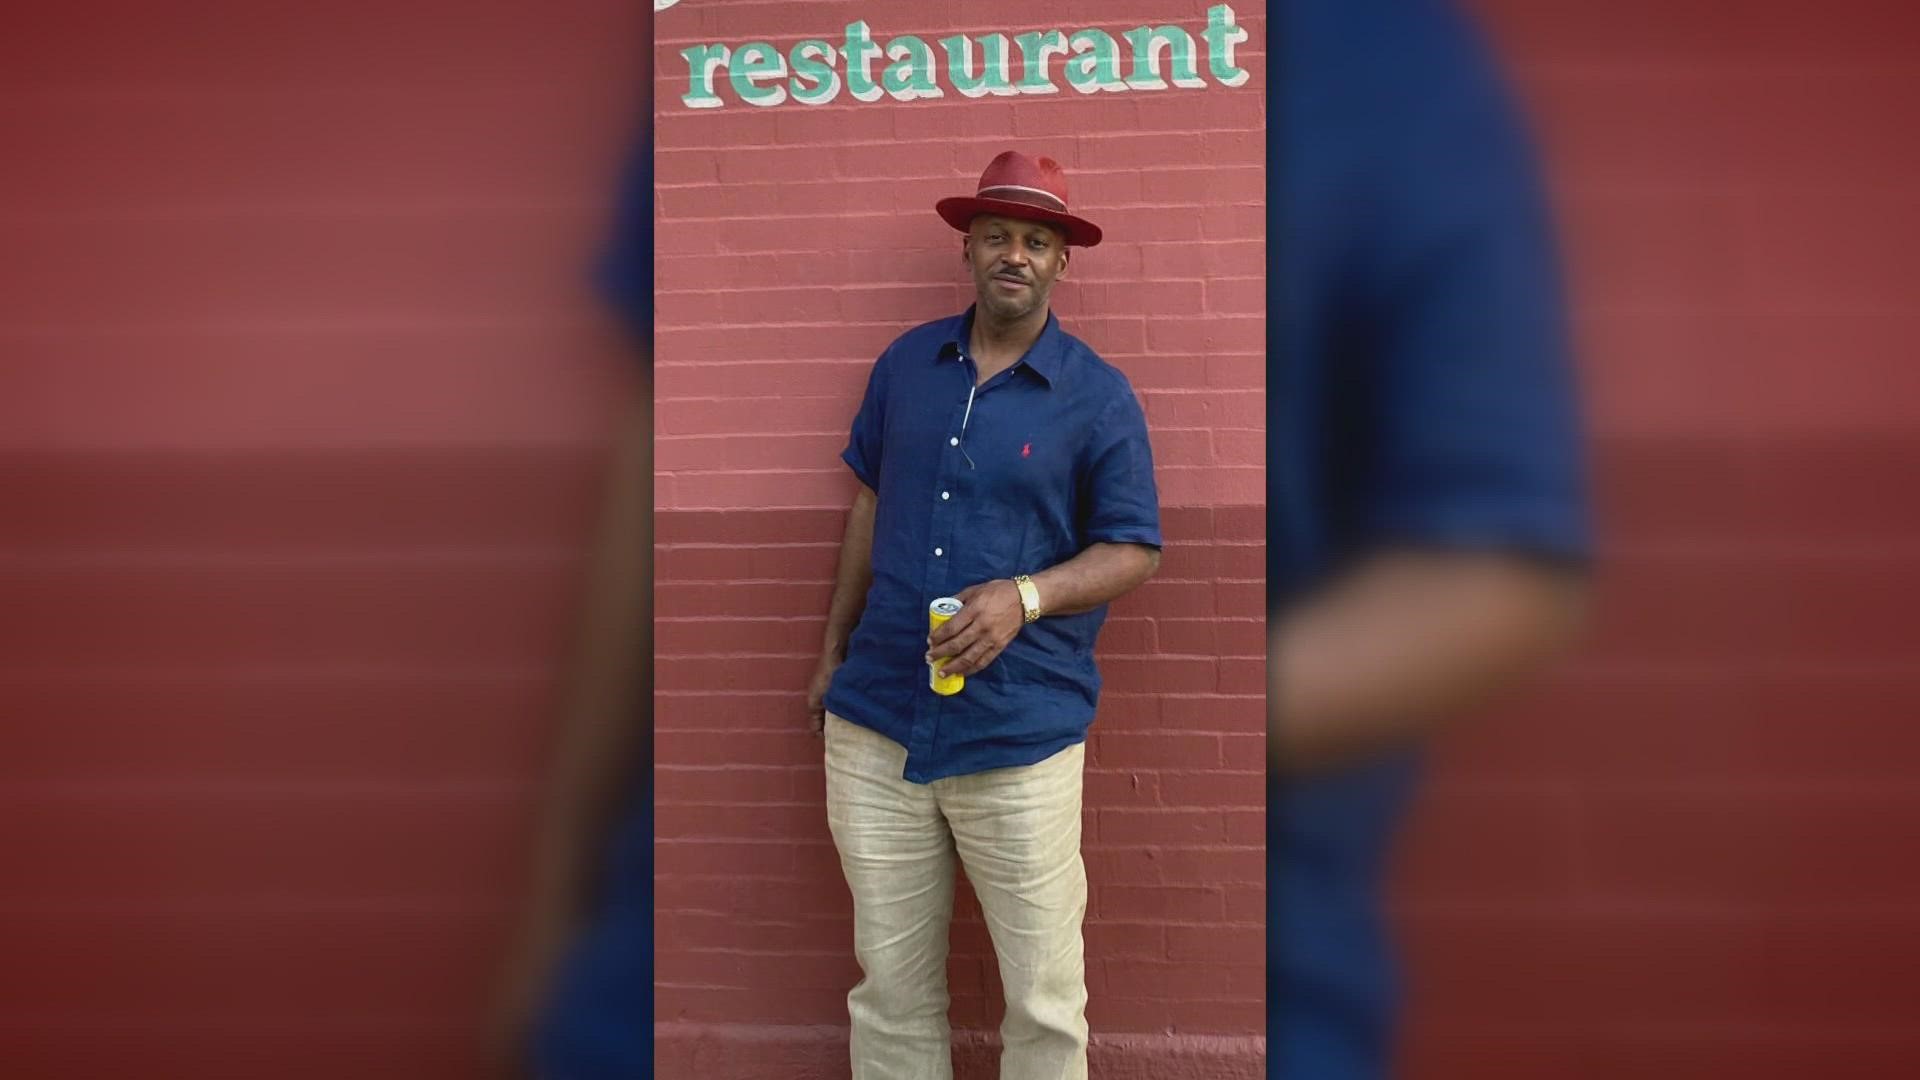 Only a week after opening his new restaurant in the quarter Richard Washington was shot and killed behind his Marigny apartment.